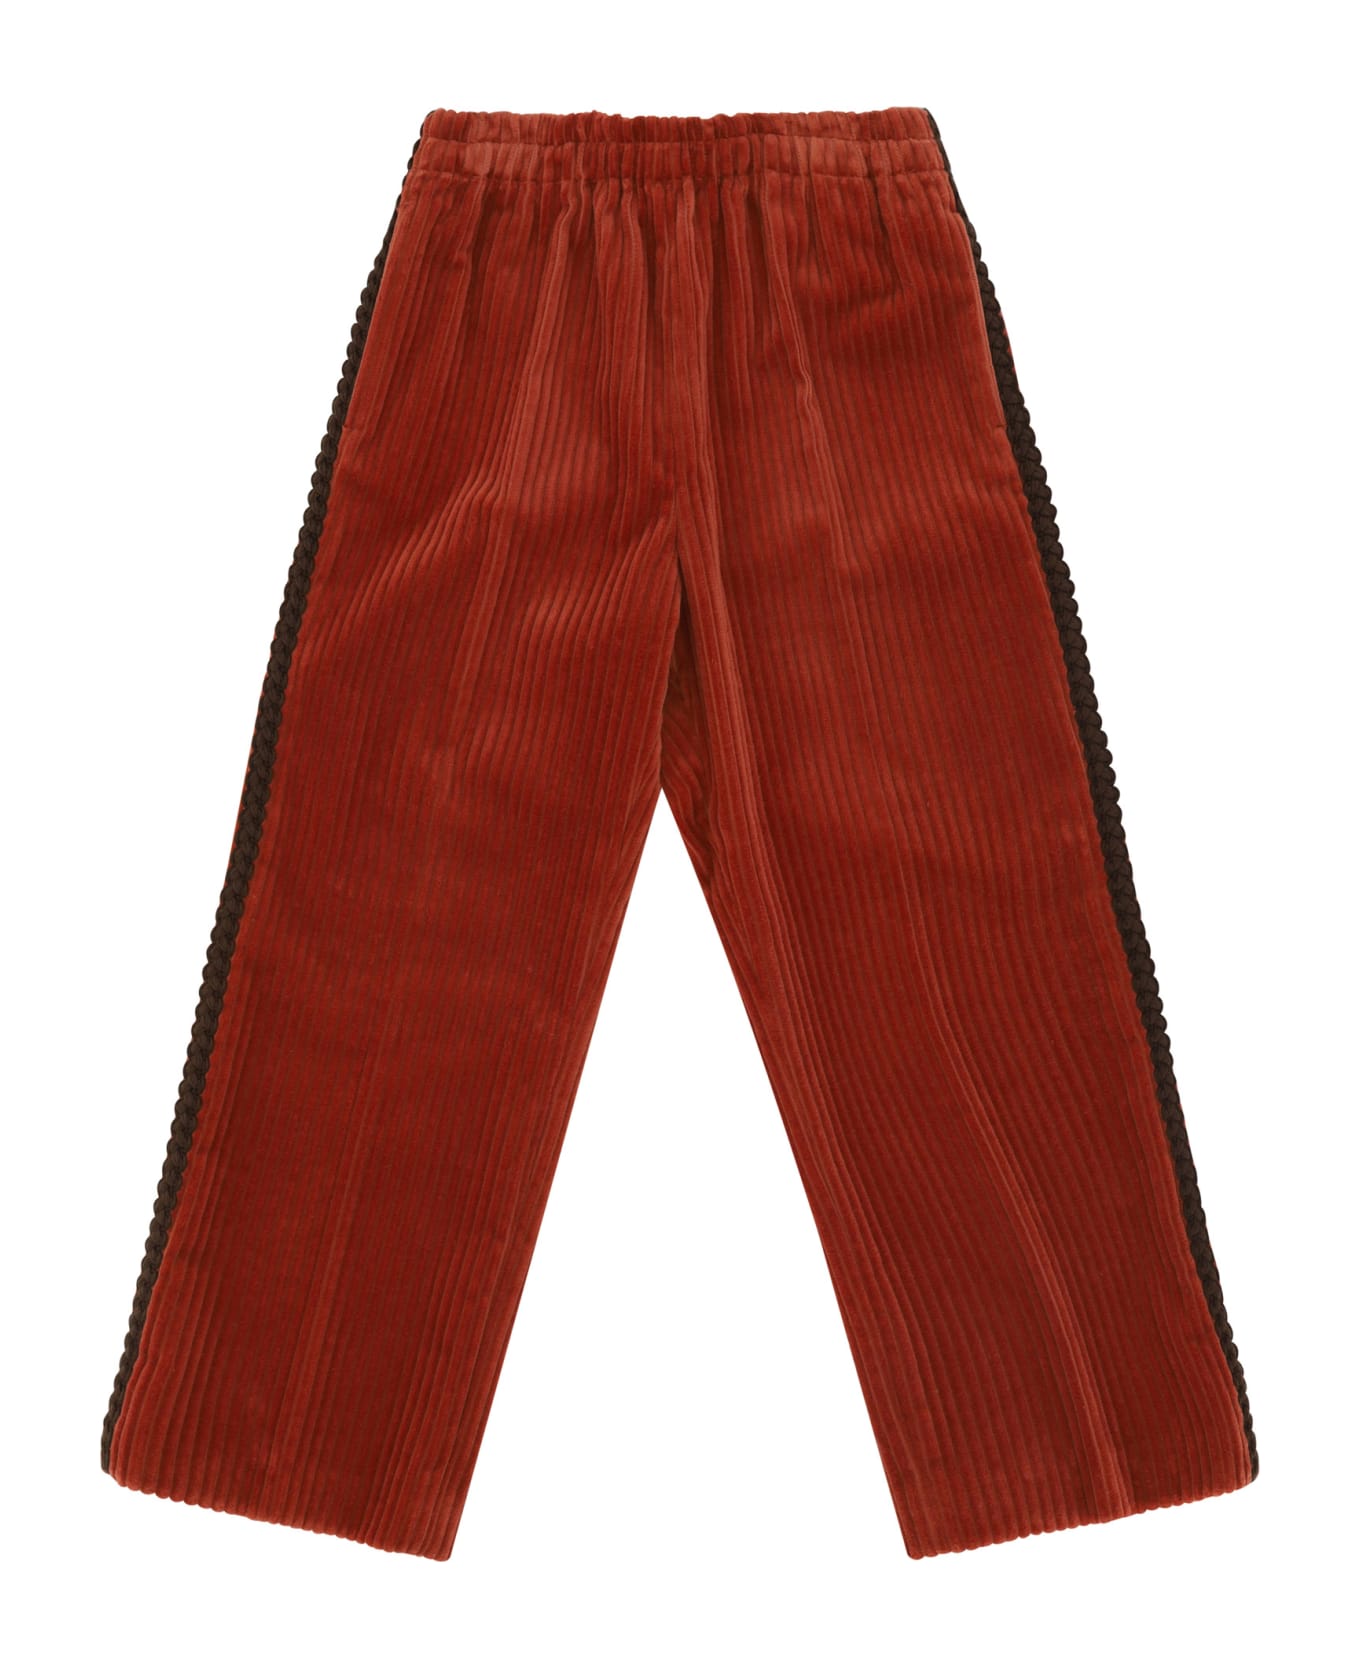 Gucci Pants For Boy - Old Copper/mix ボトムス